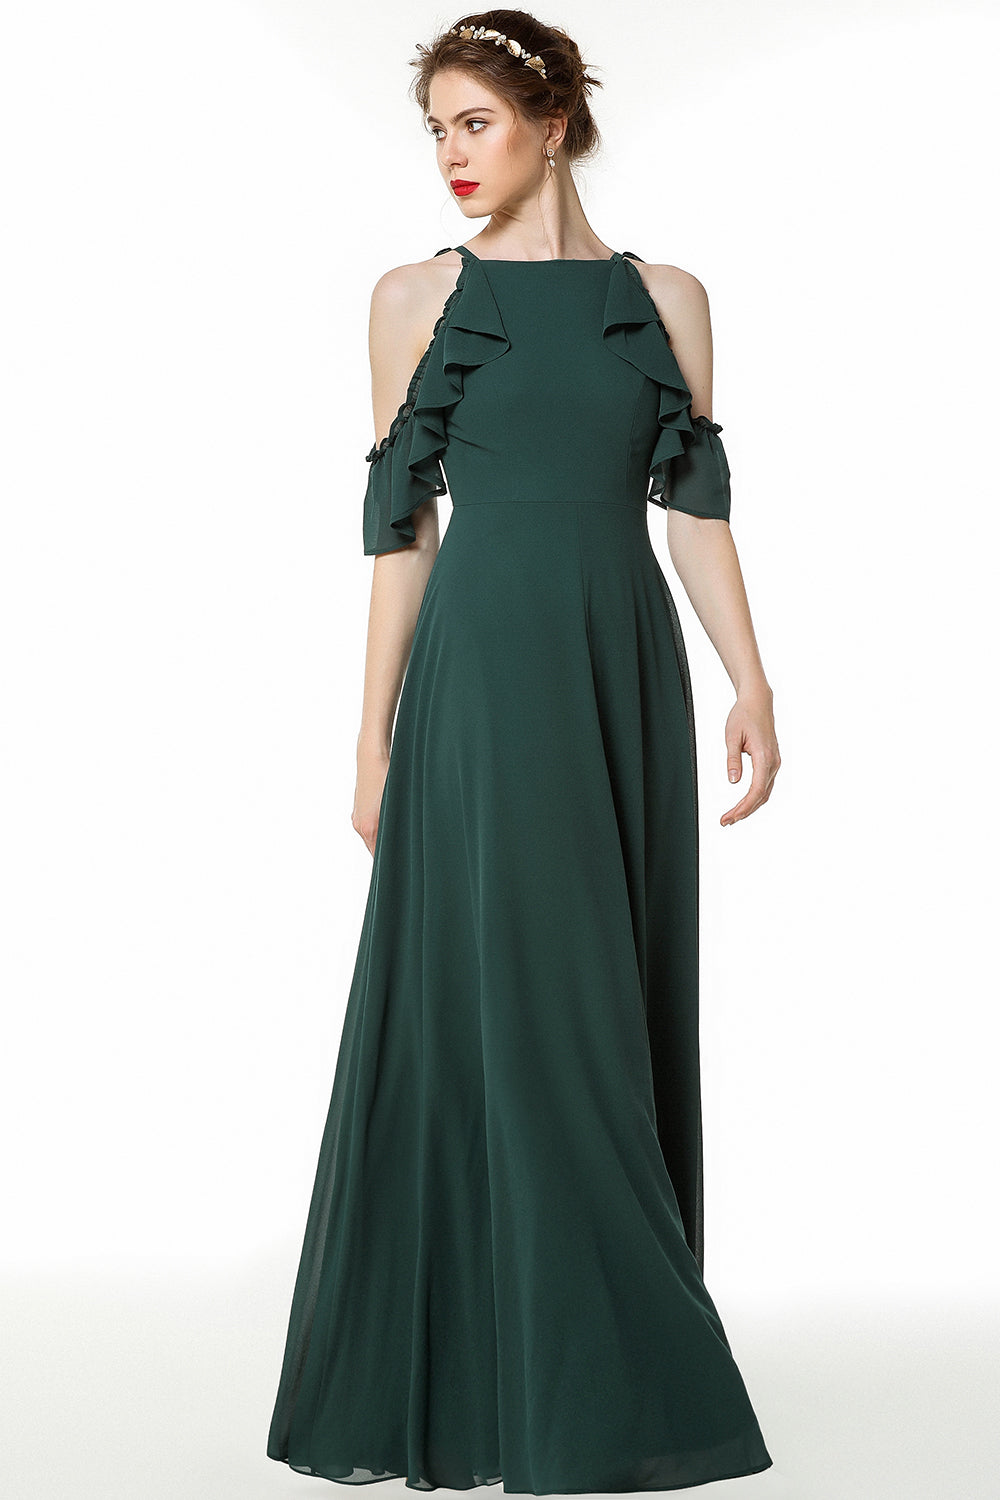 Load image into Gallery viewer, Chic Long Chiffon A-Line Bridesmaid Dress With Ruffles Embellishment-BIZTUNNEL
